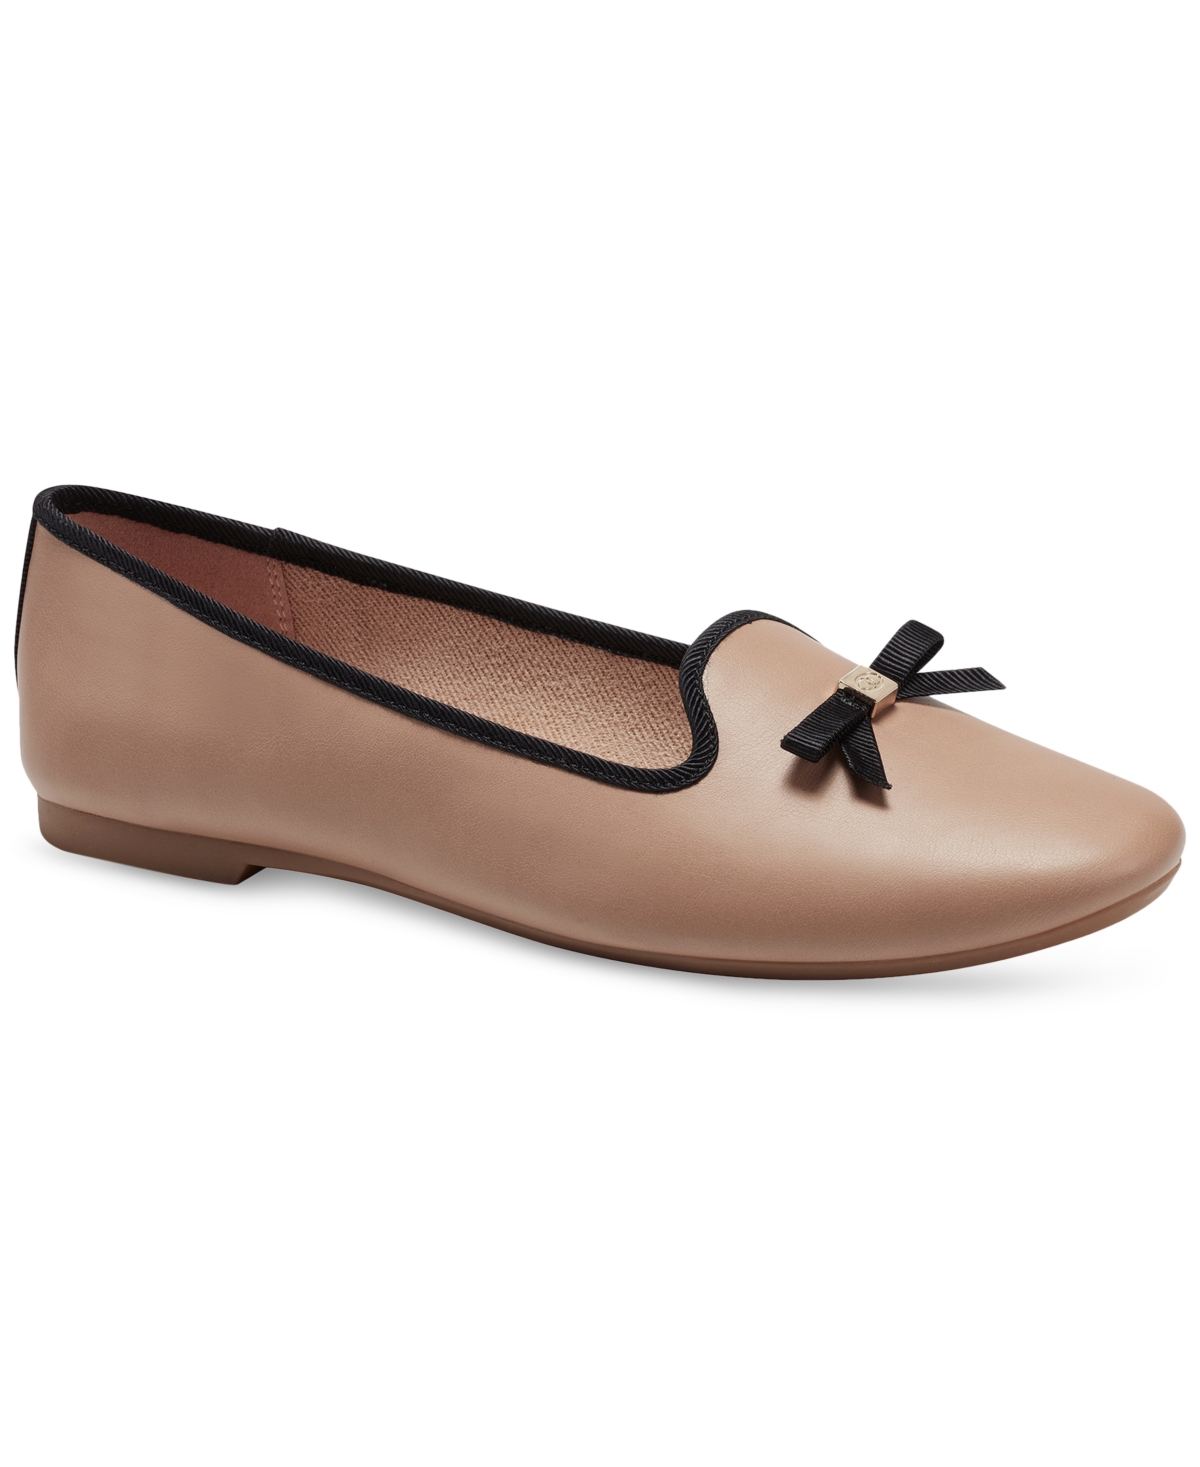 Kimii Deconstructed Loafers, Created for Macy's - Nude/black